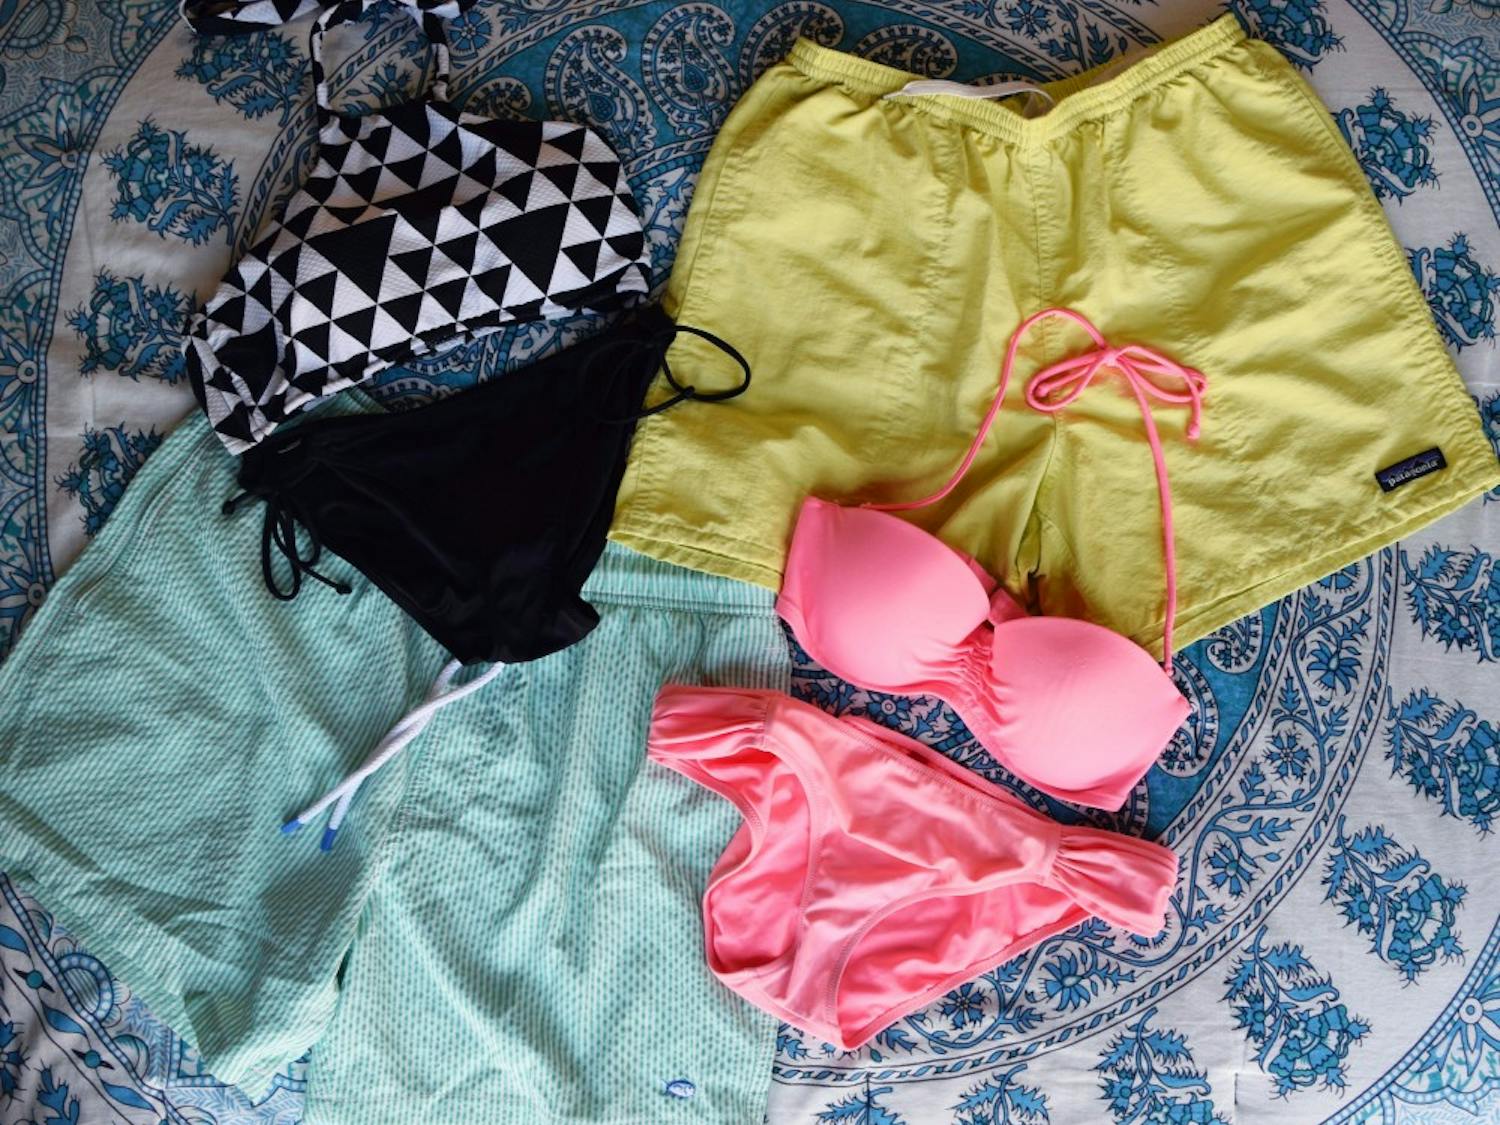 For girls, bandeau tops are popular.  For guys, Patagonia and Columbia shorts are in style.